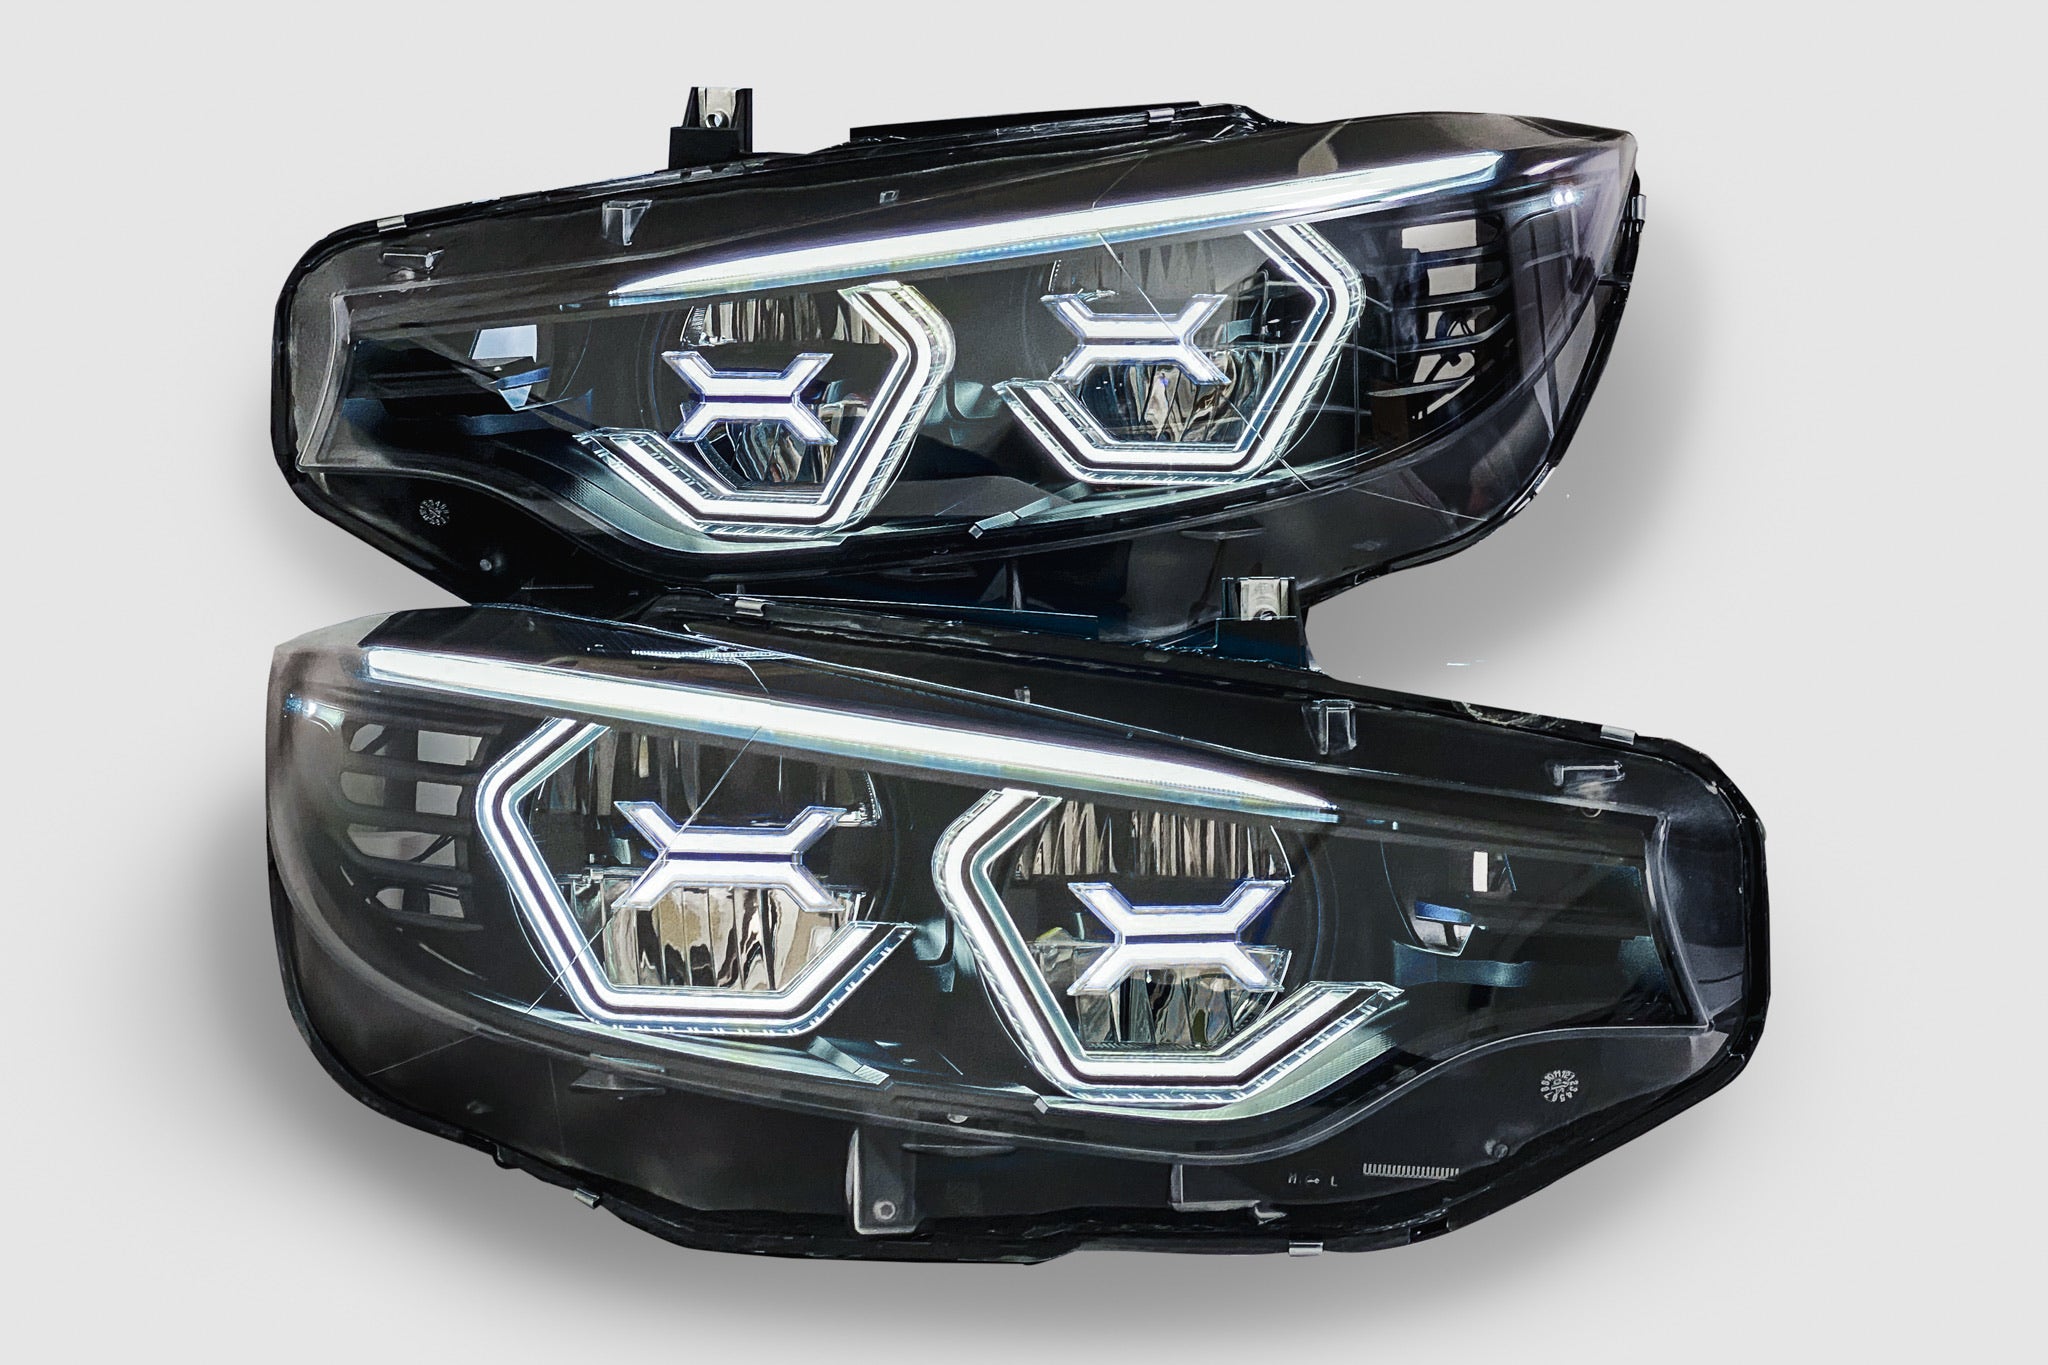 PRE-BUILT F8X F80 M3 F82 F83 M4 F32 F36 Vision Concept Headlights With Red Concept X (2014 - 2017 LED Headlights Only)